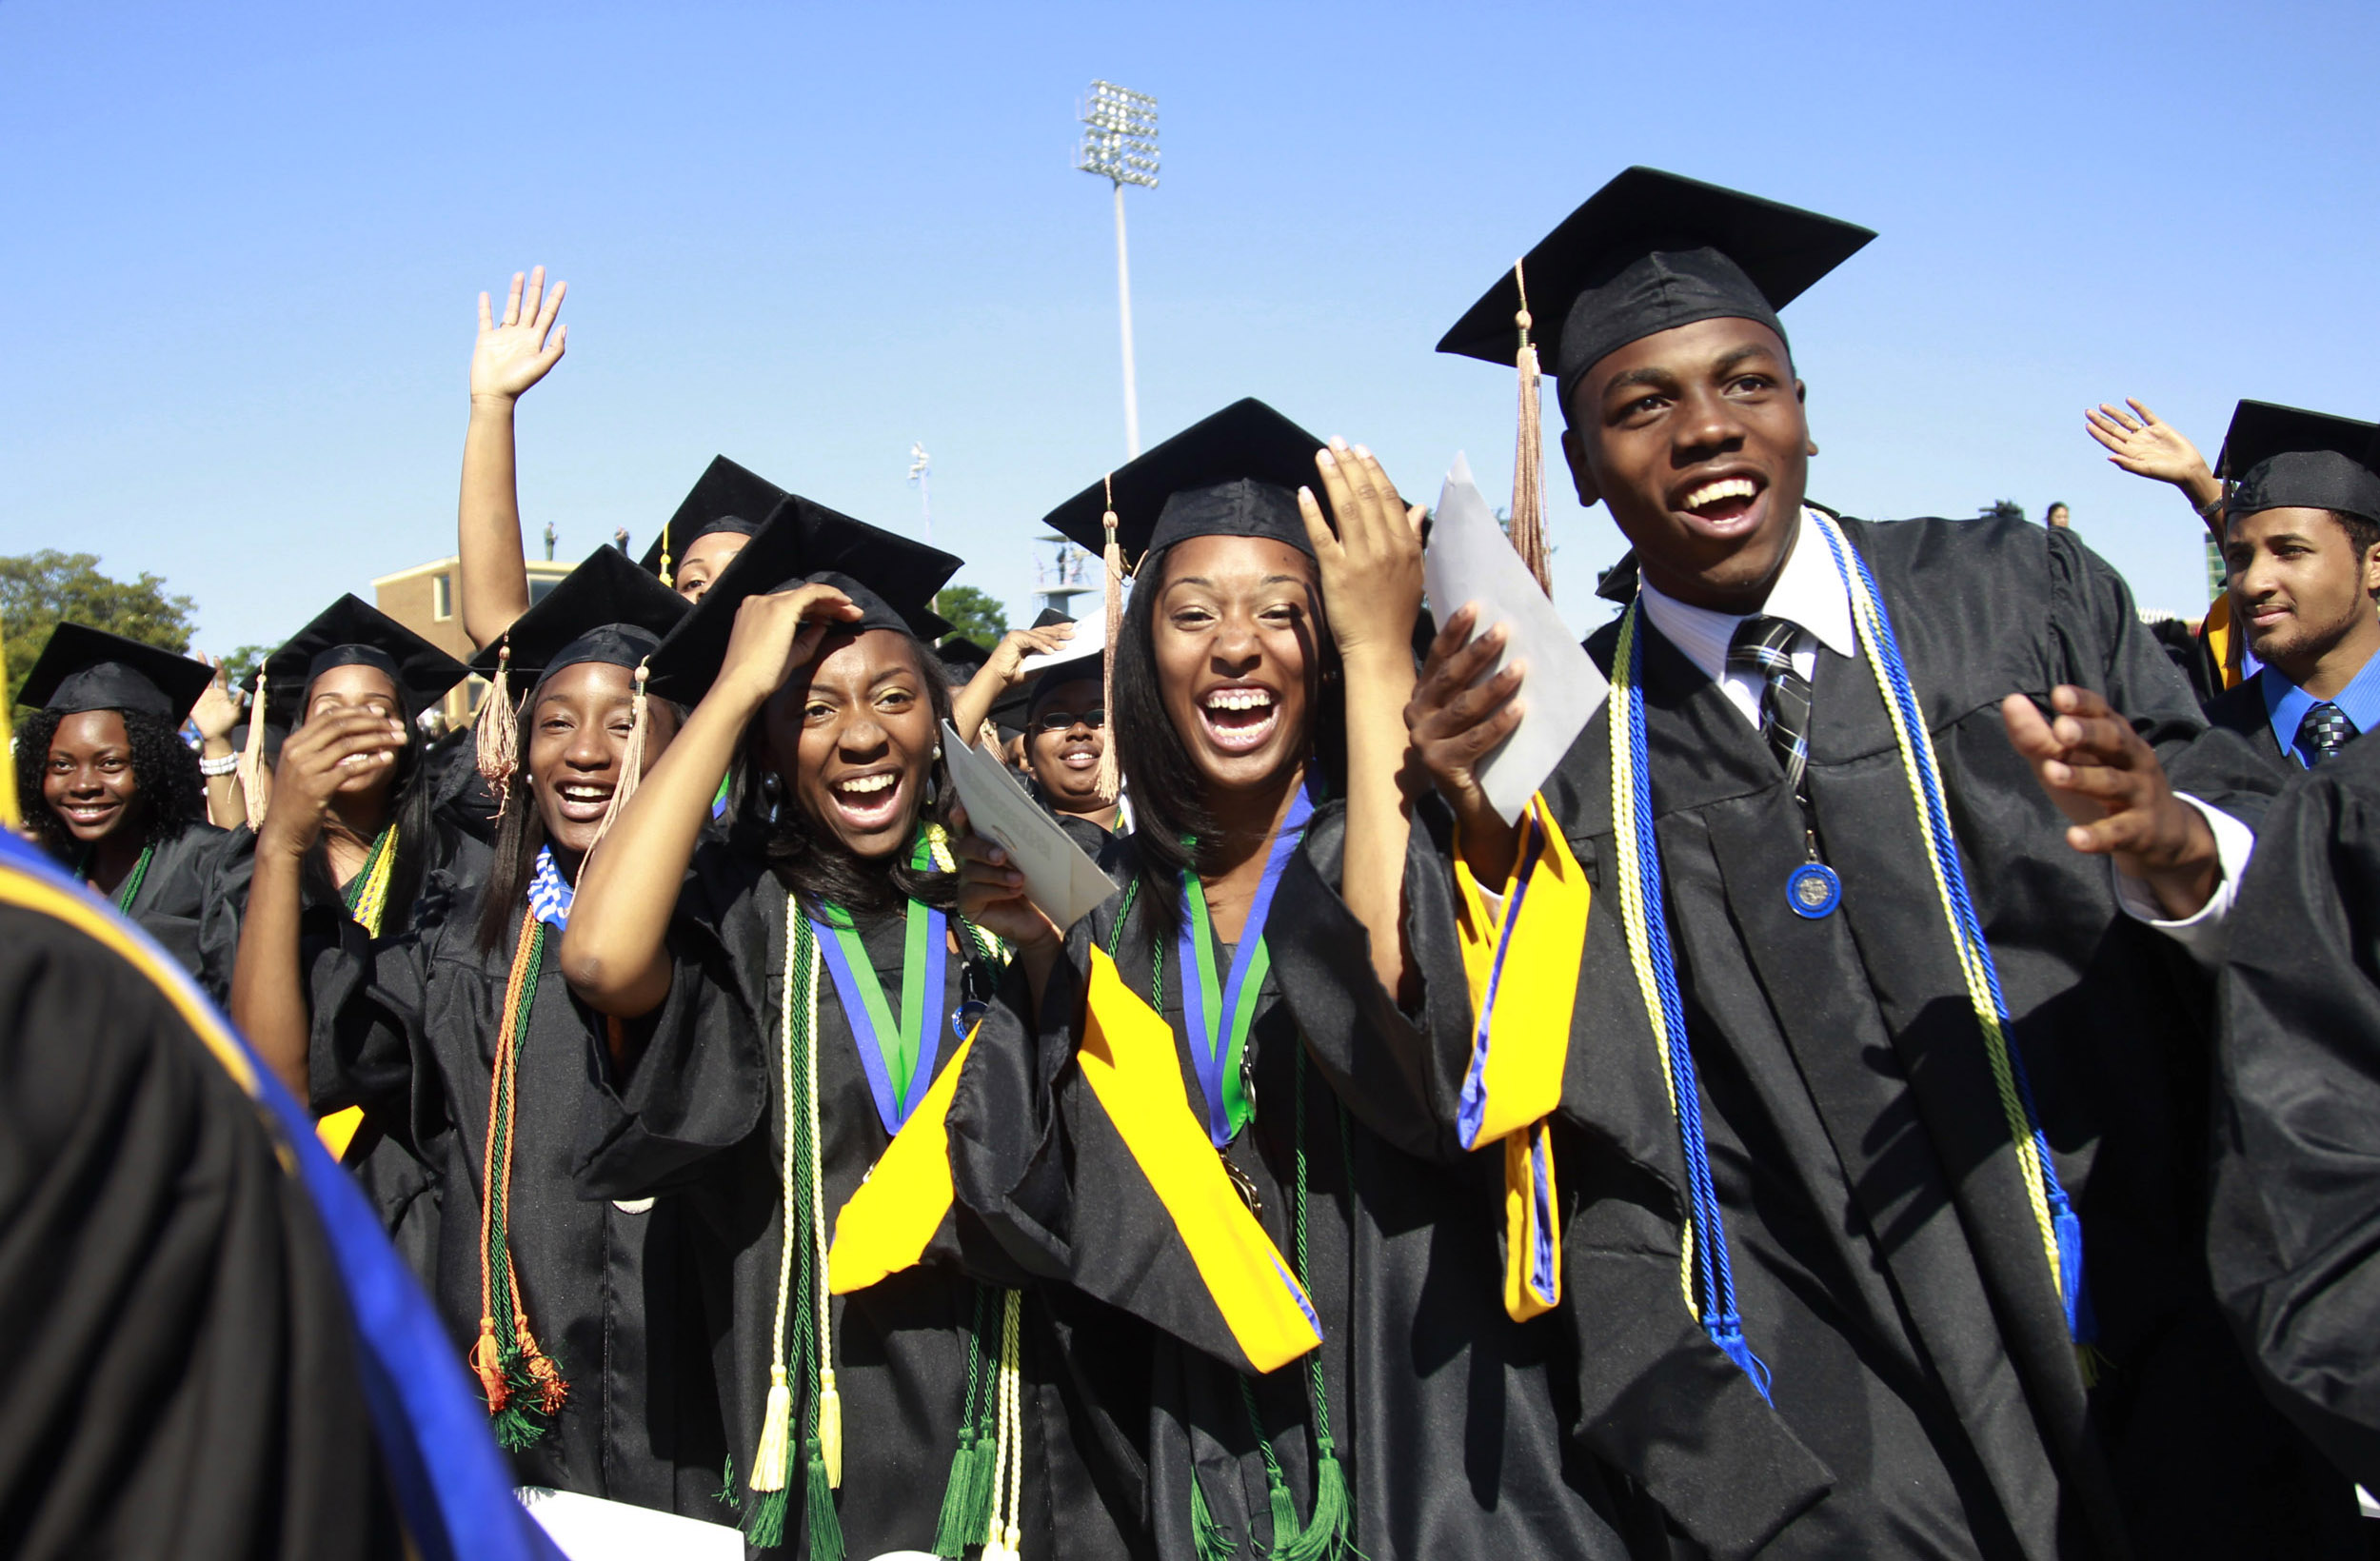 Graduate Scholarships for Black College Students